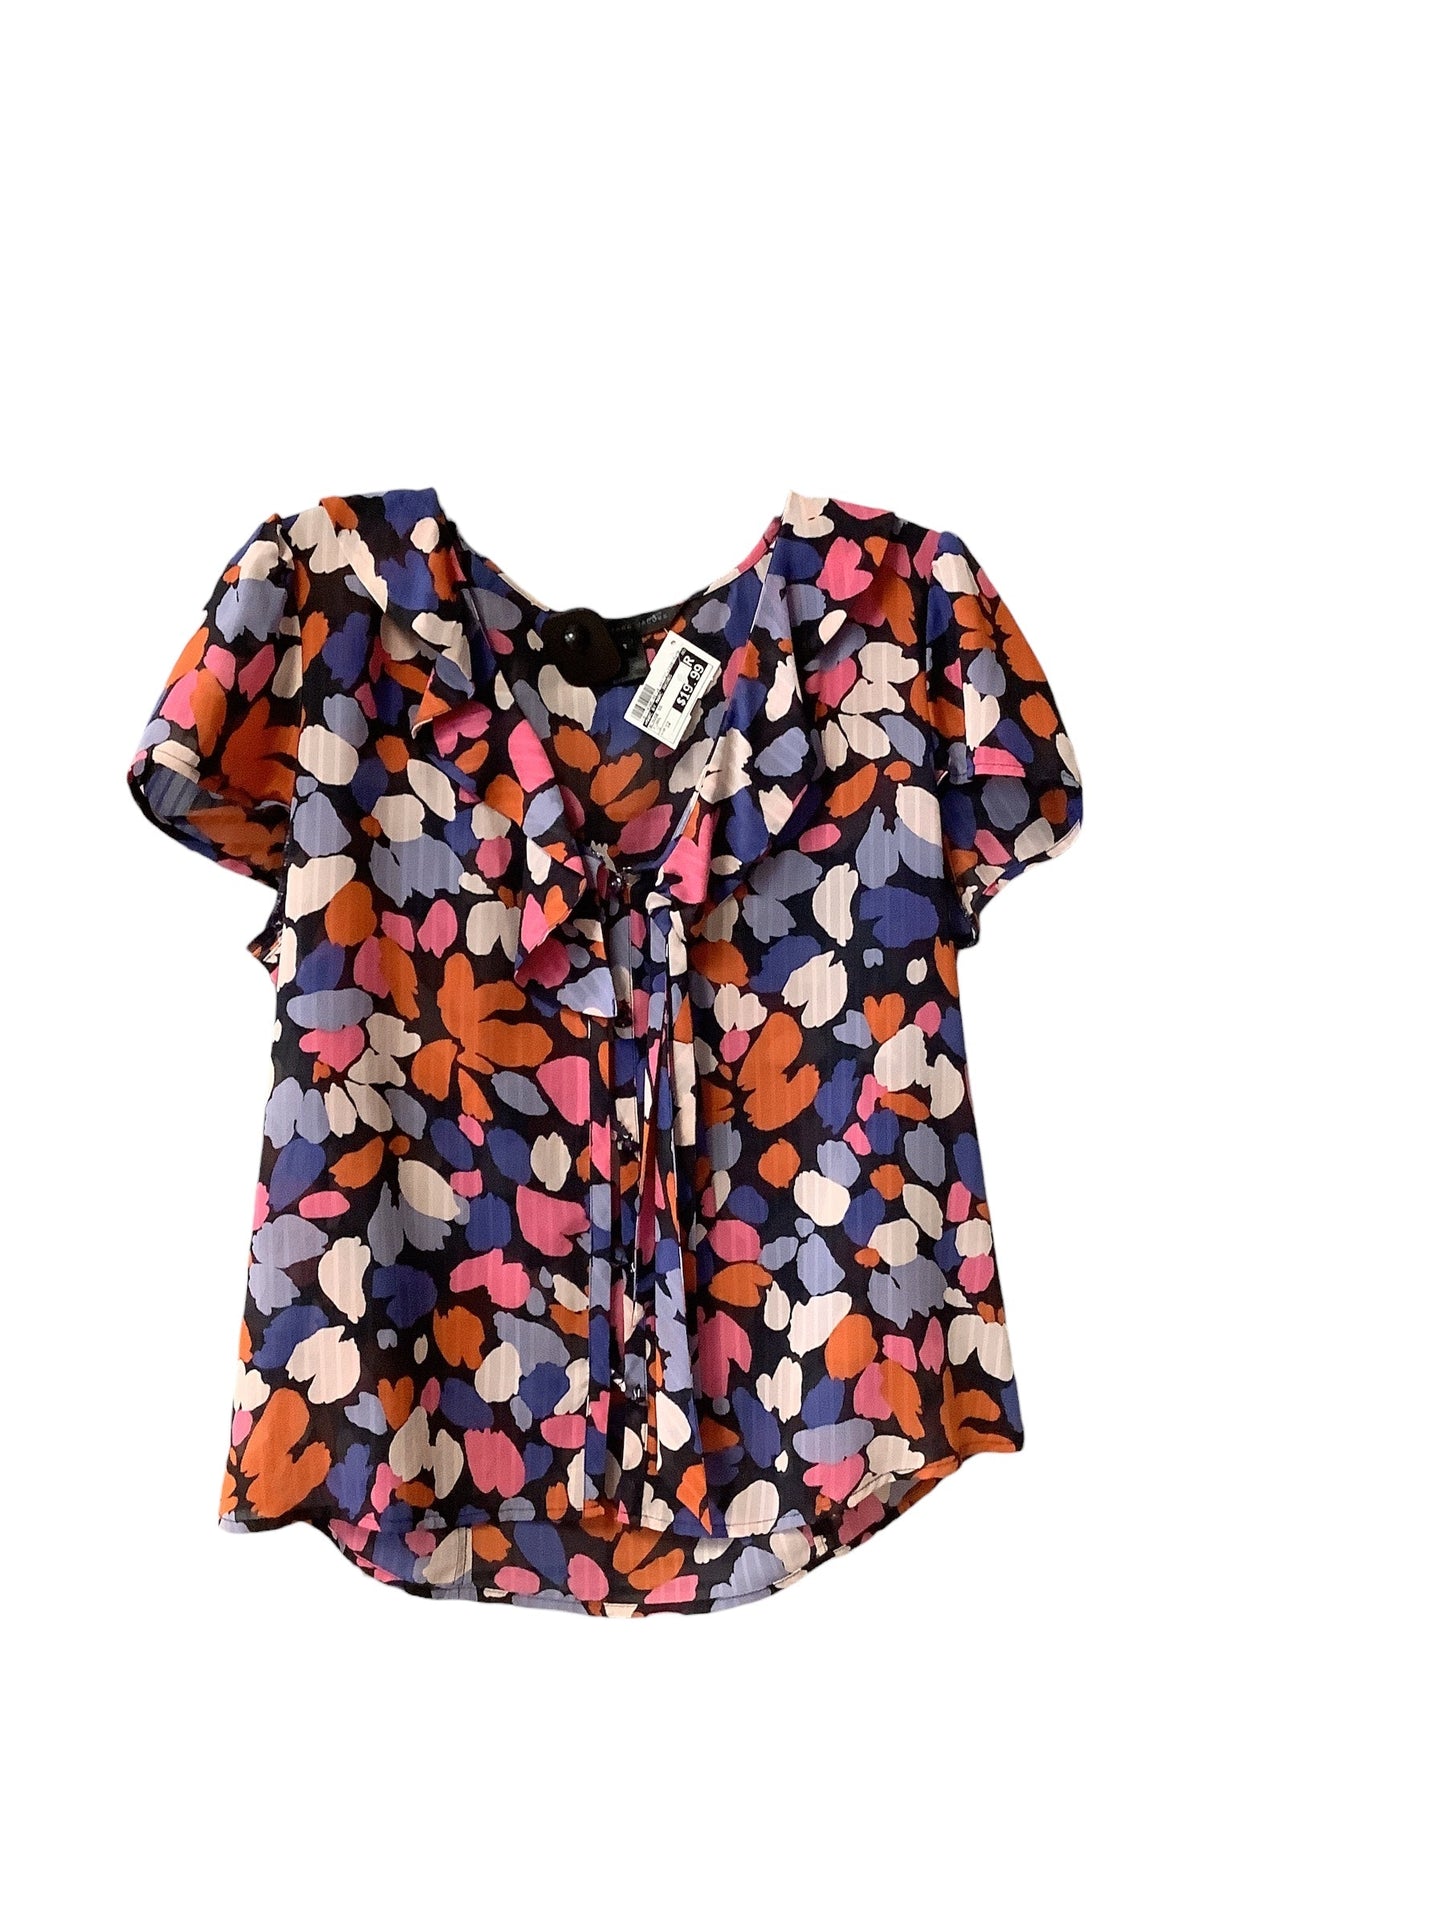 Floral Blouse Short Sleeve Marc By Marc Jacobs, Size 12